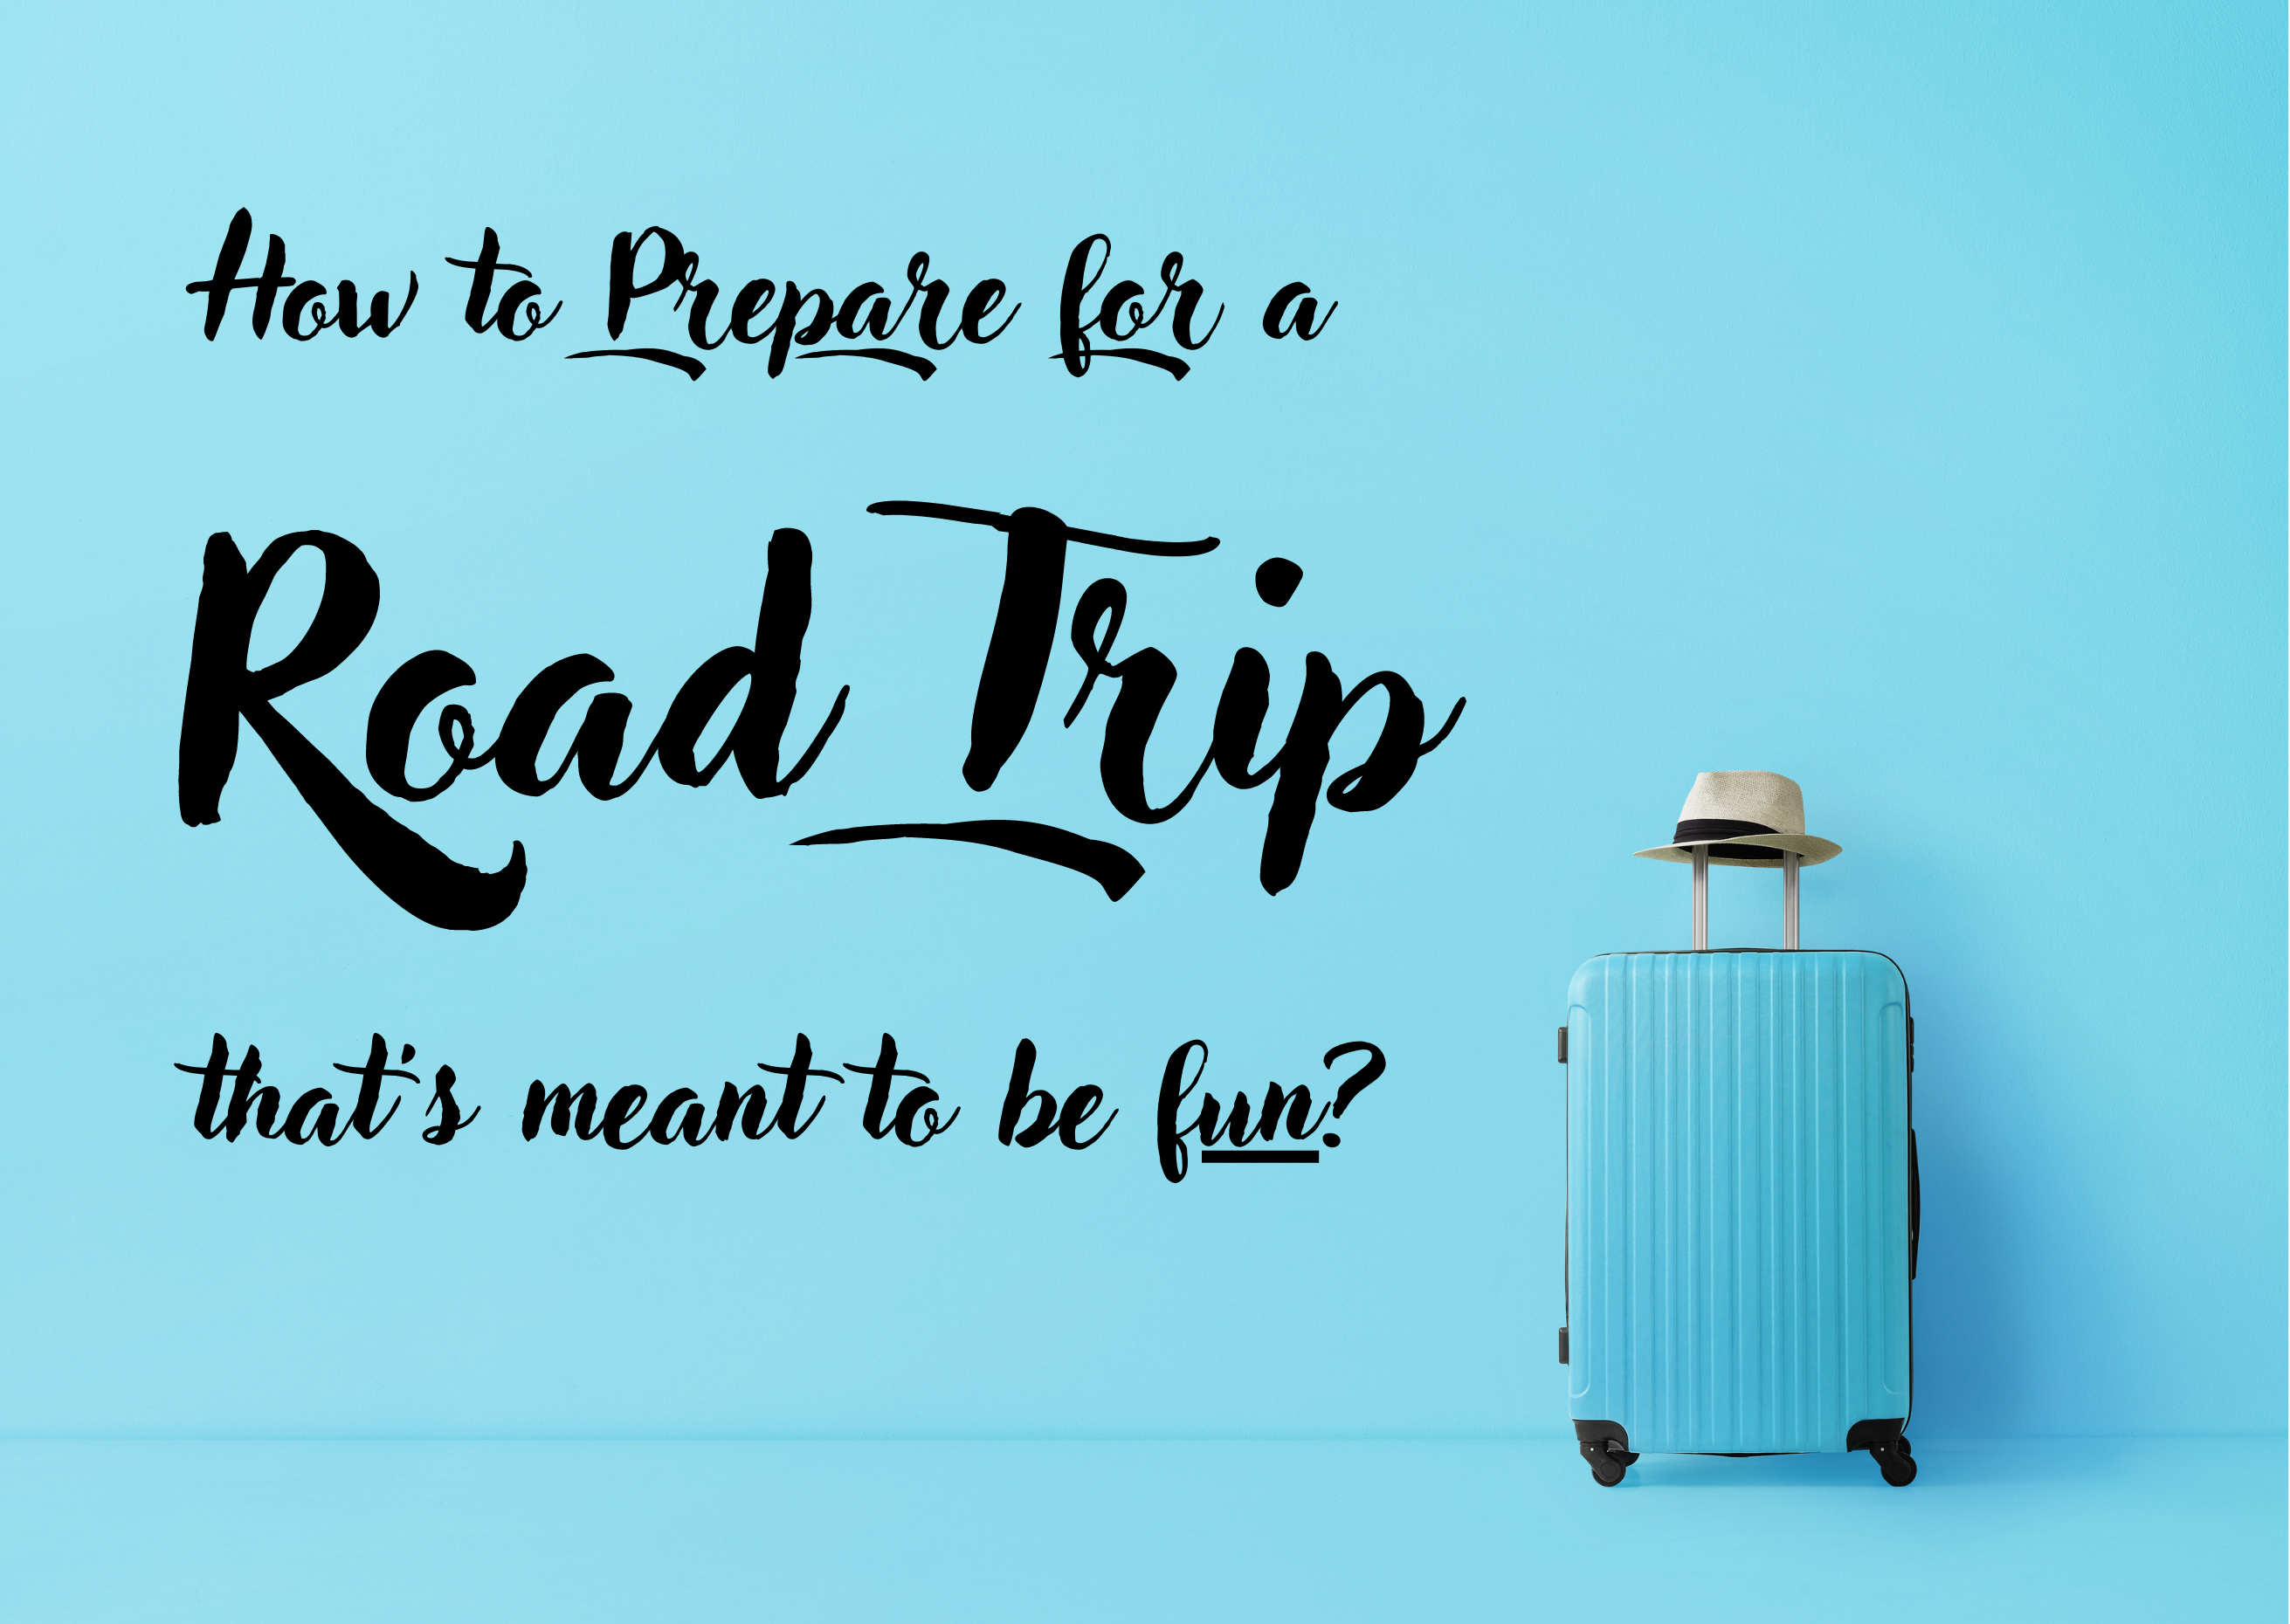 How to Prepare for a Road Trip That's Meant to Be Fun?